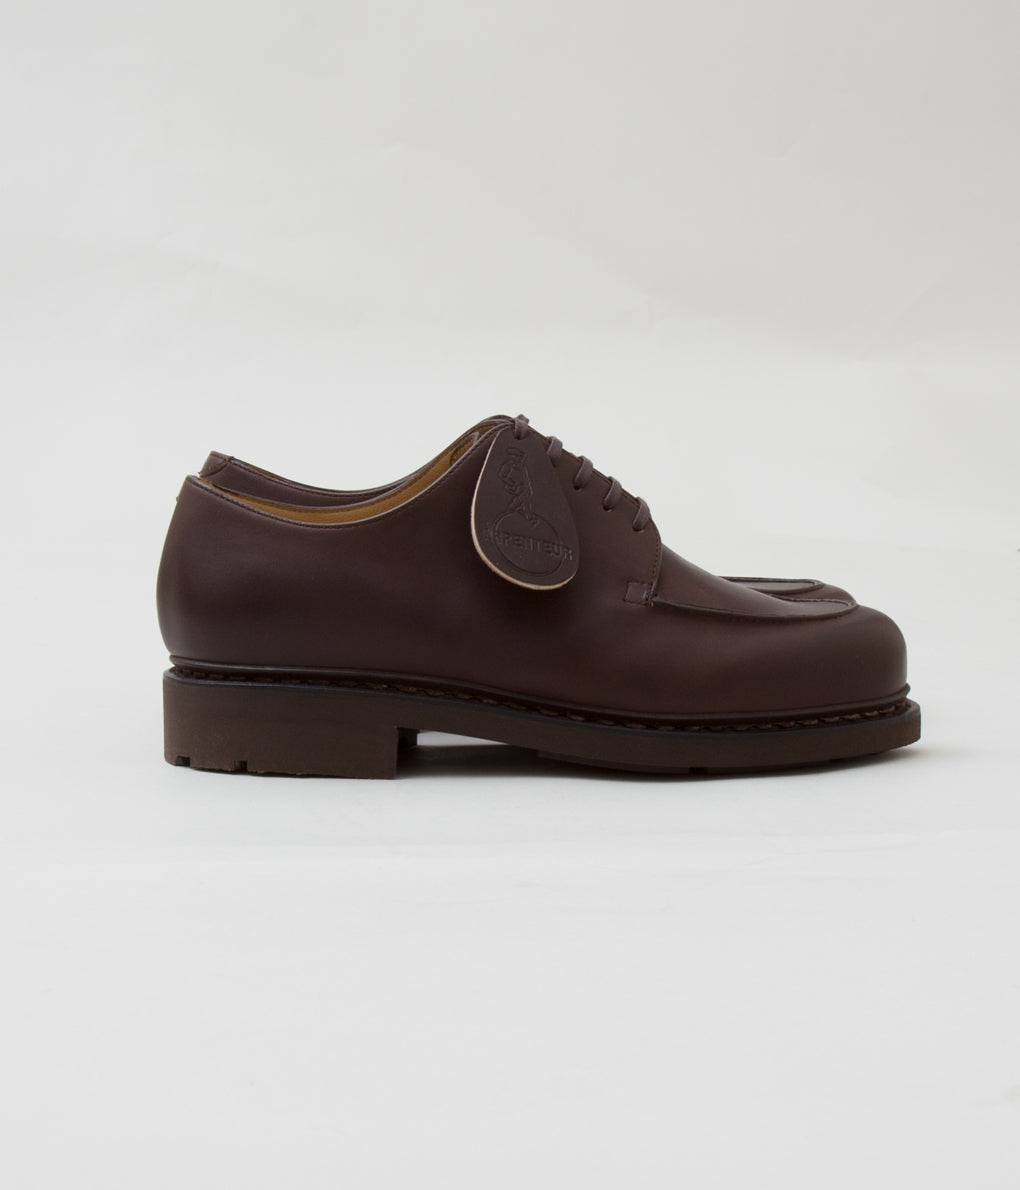 PARABOOT for ARPENTEUR "MIRAGE ONE-CUT" (BROWN)